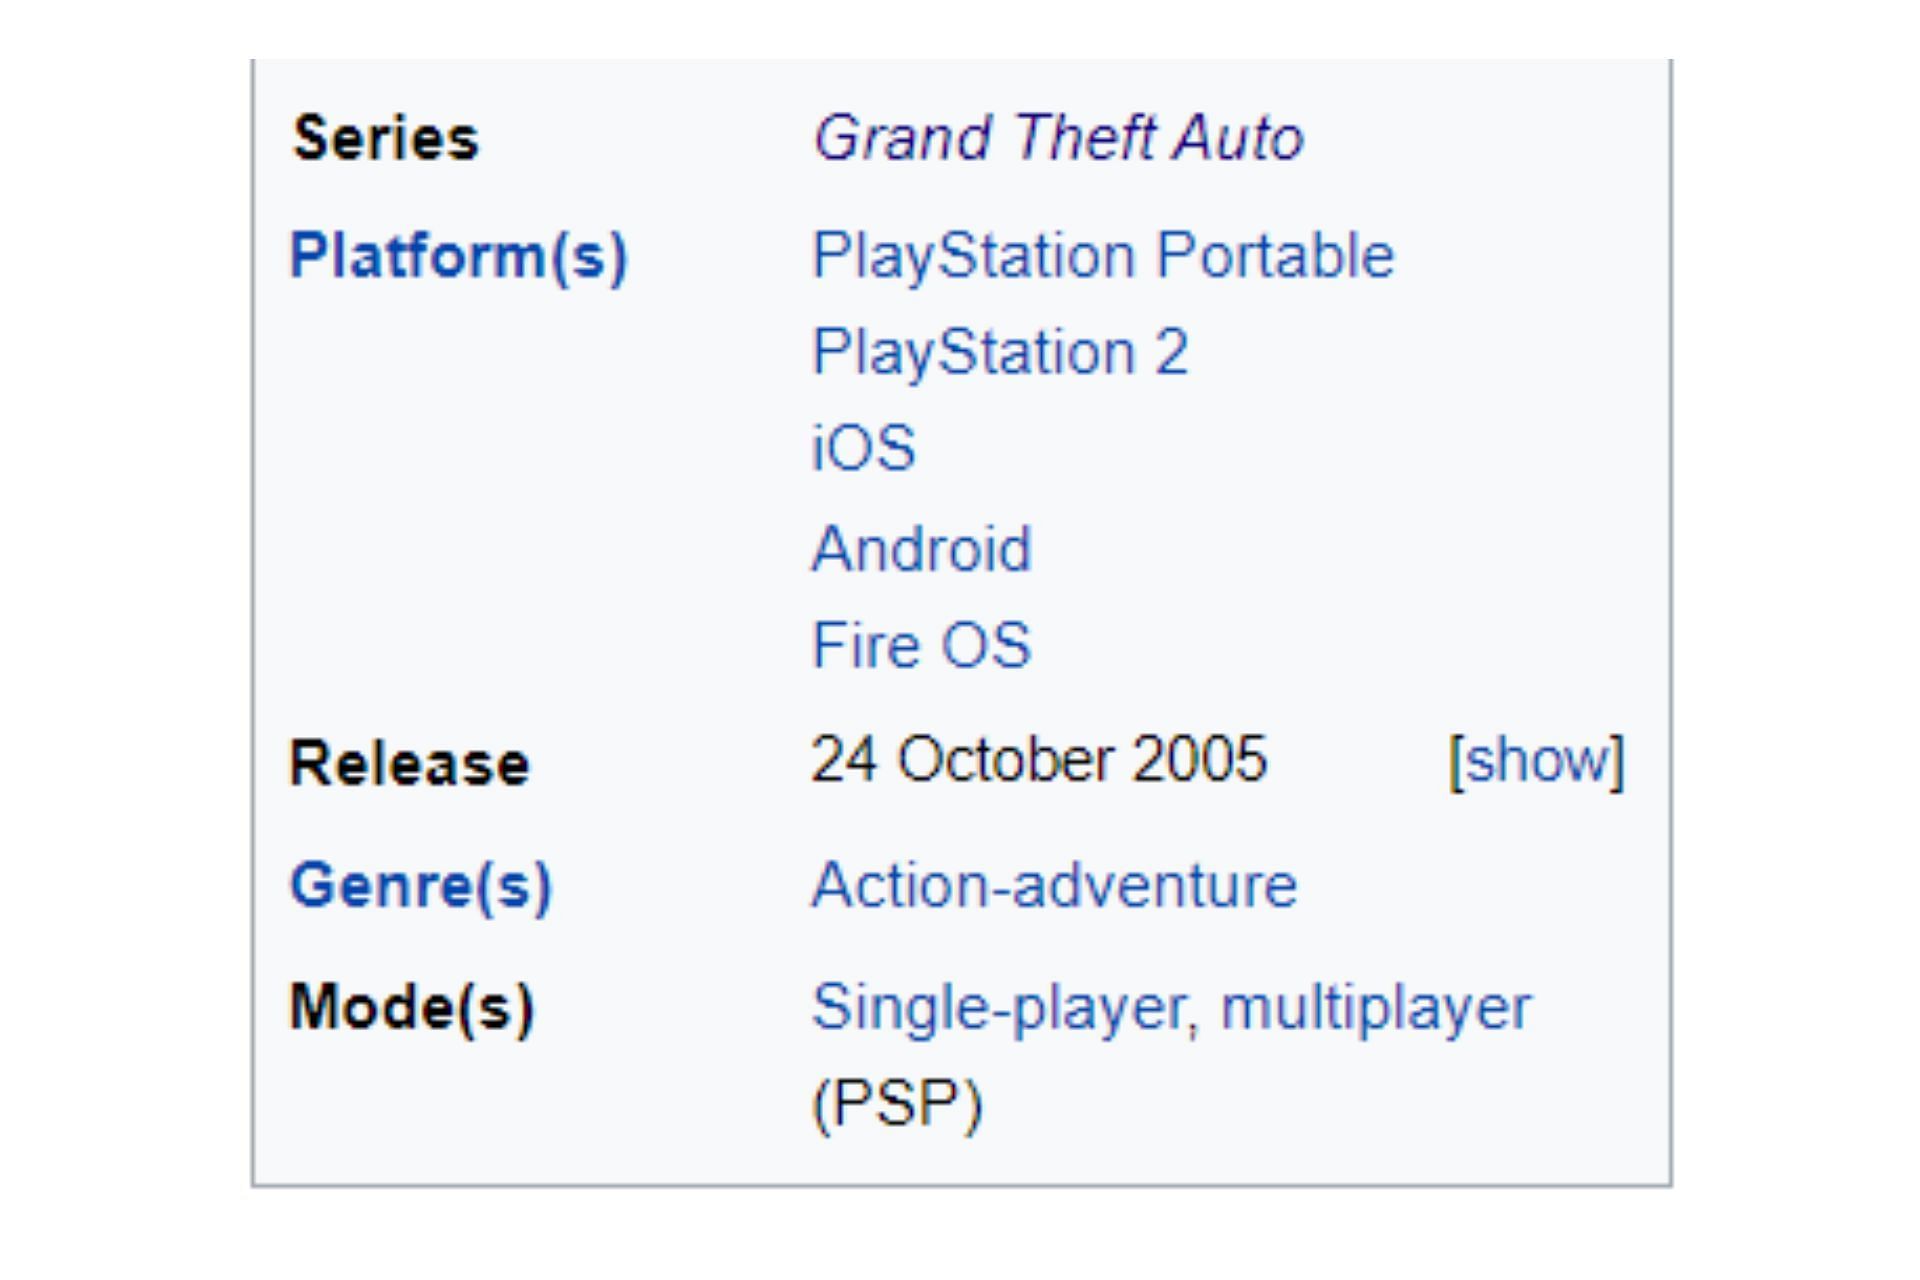 Grand Theft Auto Liberty City Stories release date as per Wikipedia